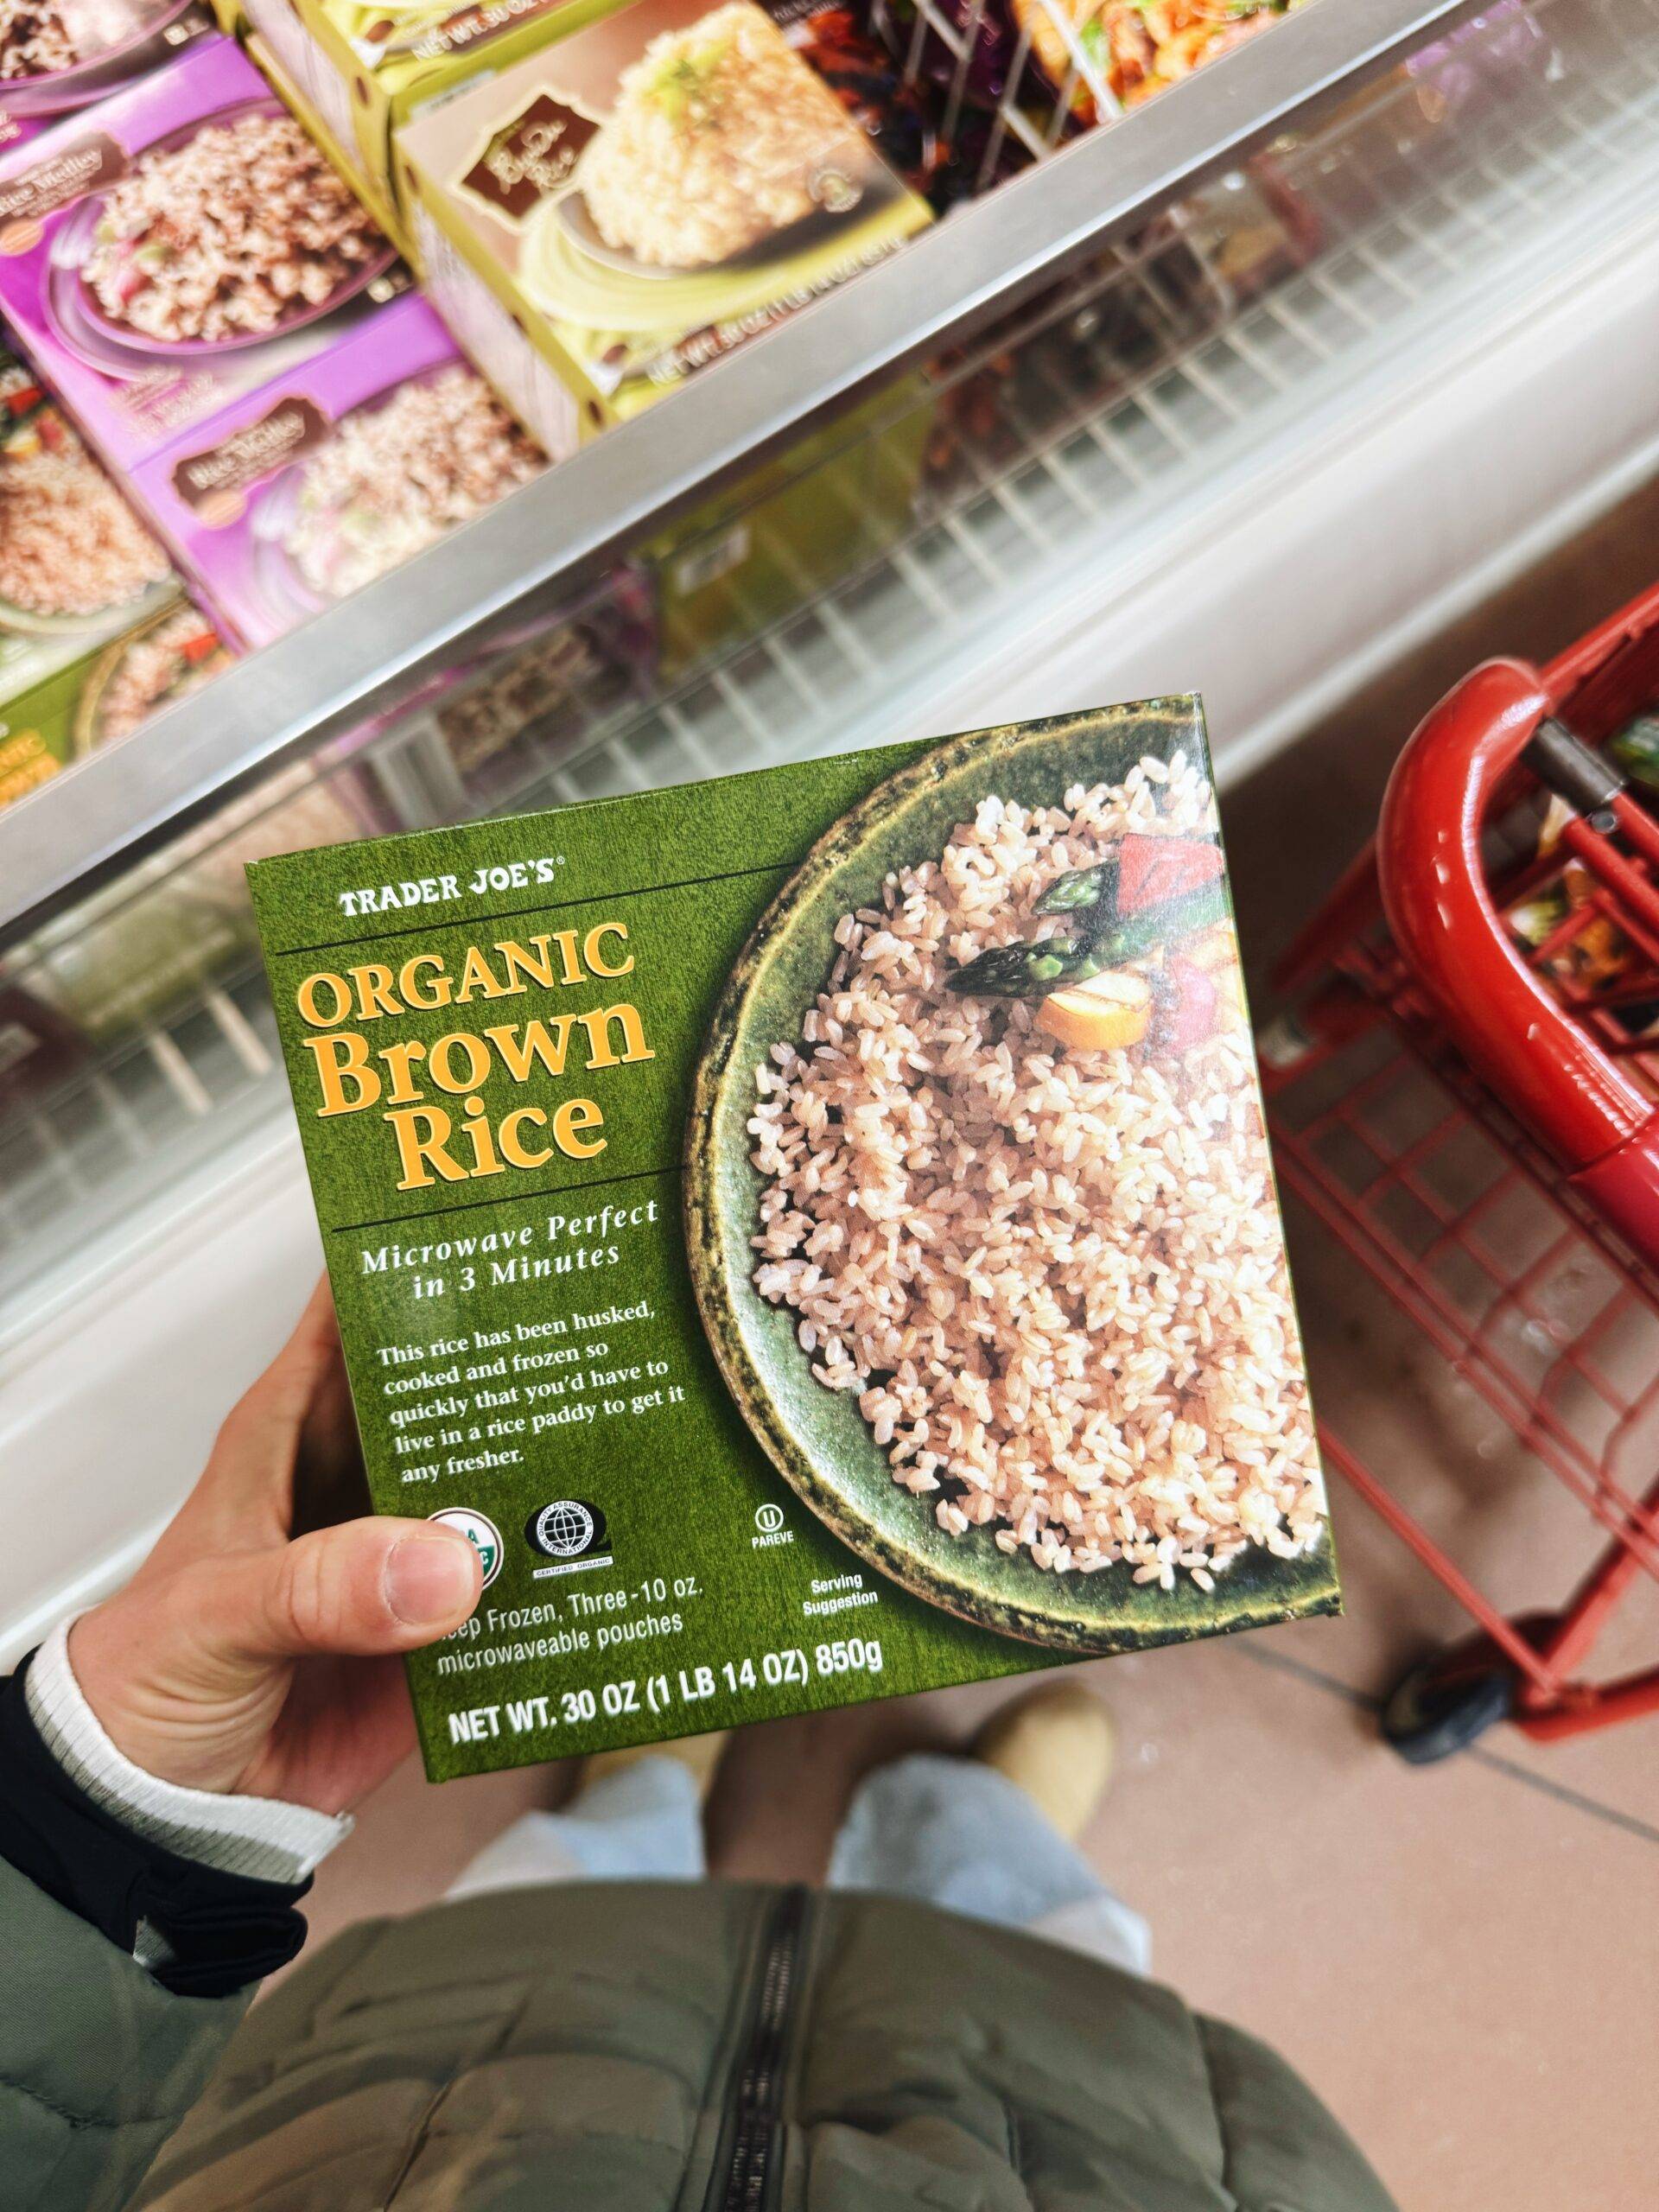 Microwaveable brown rice in a box.